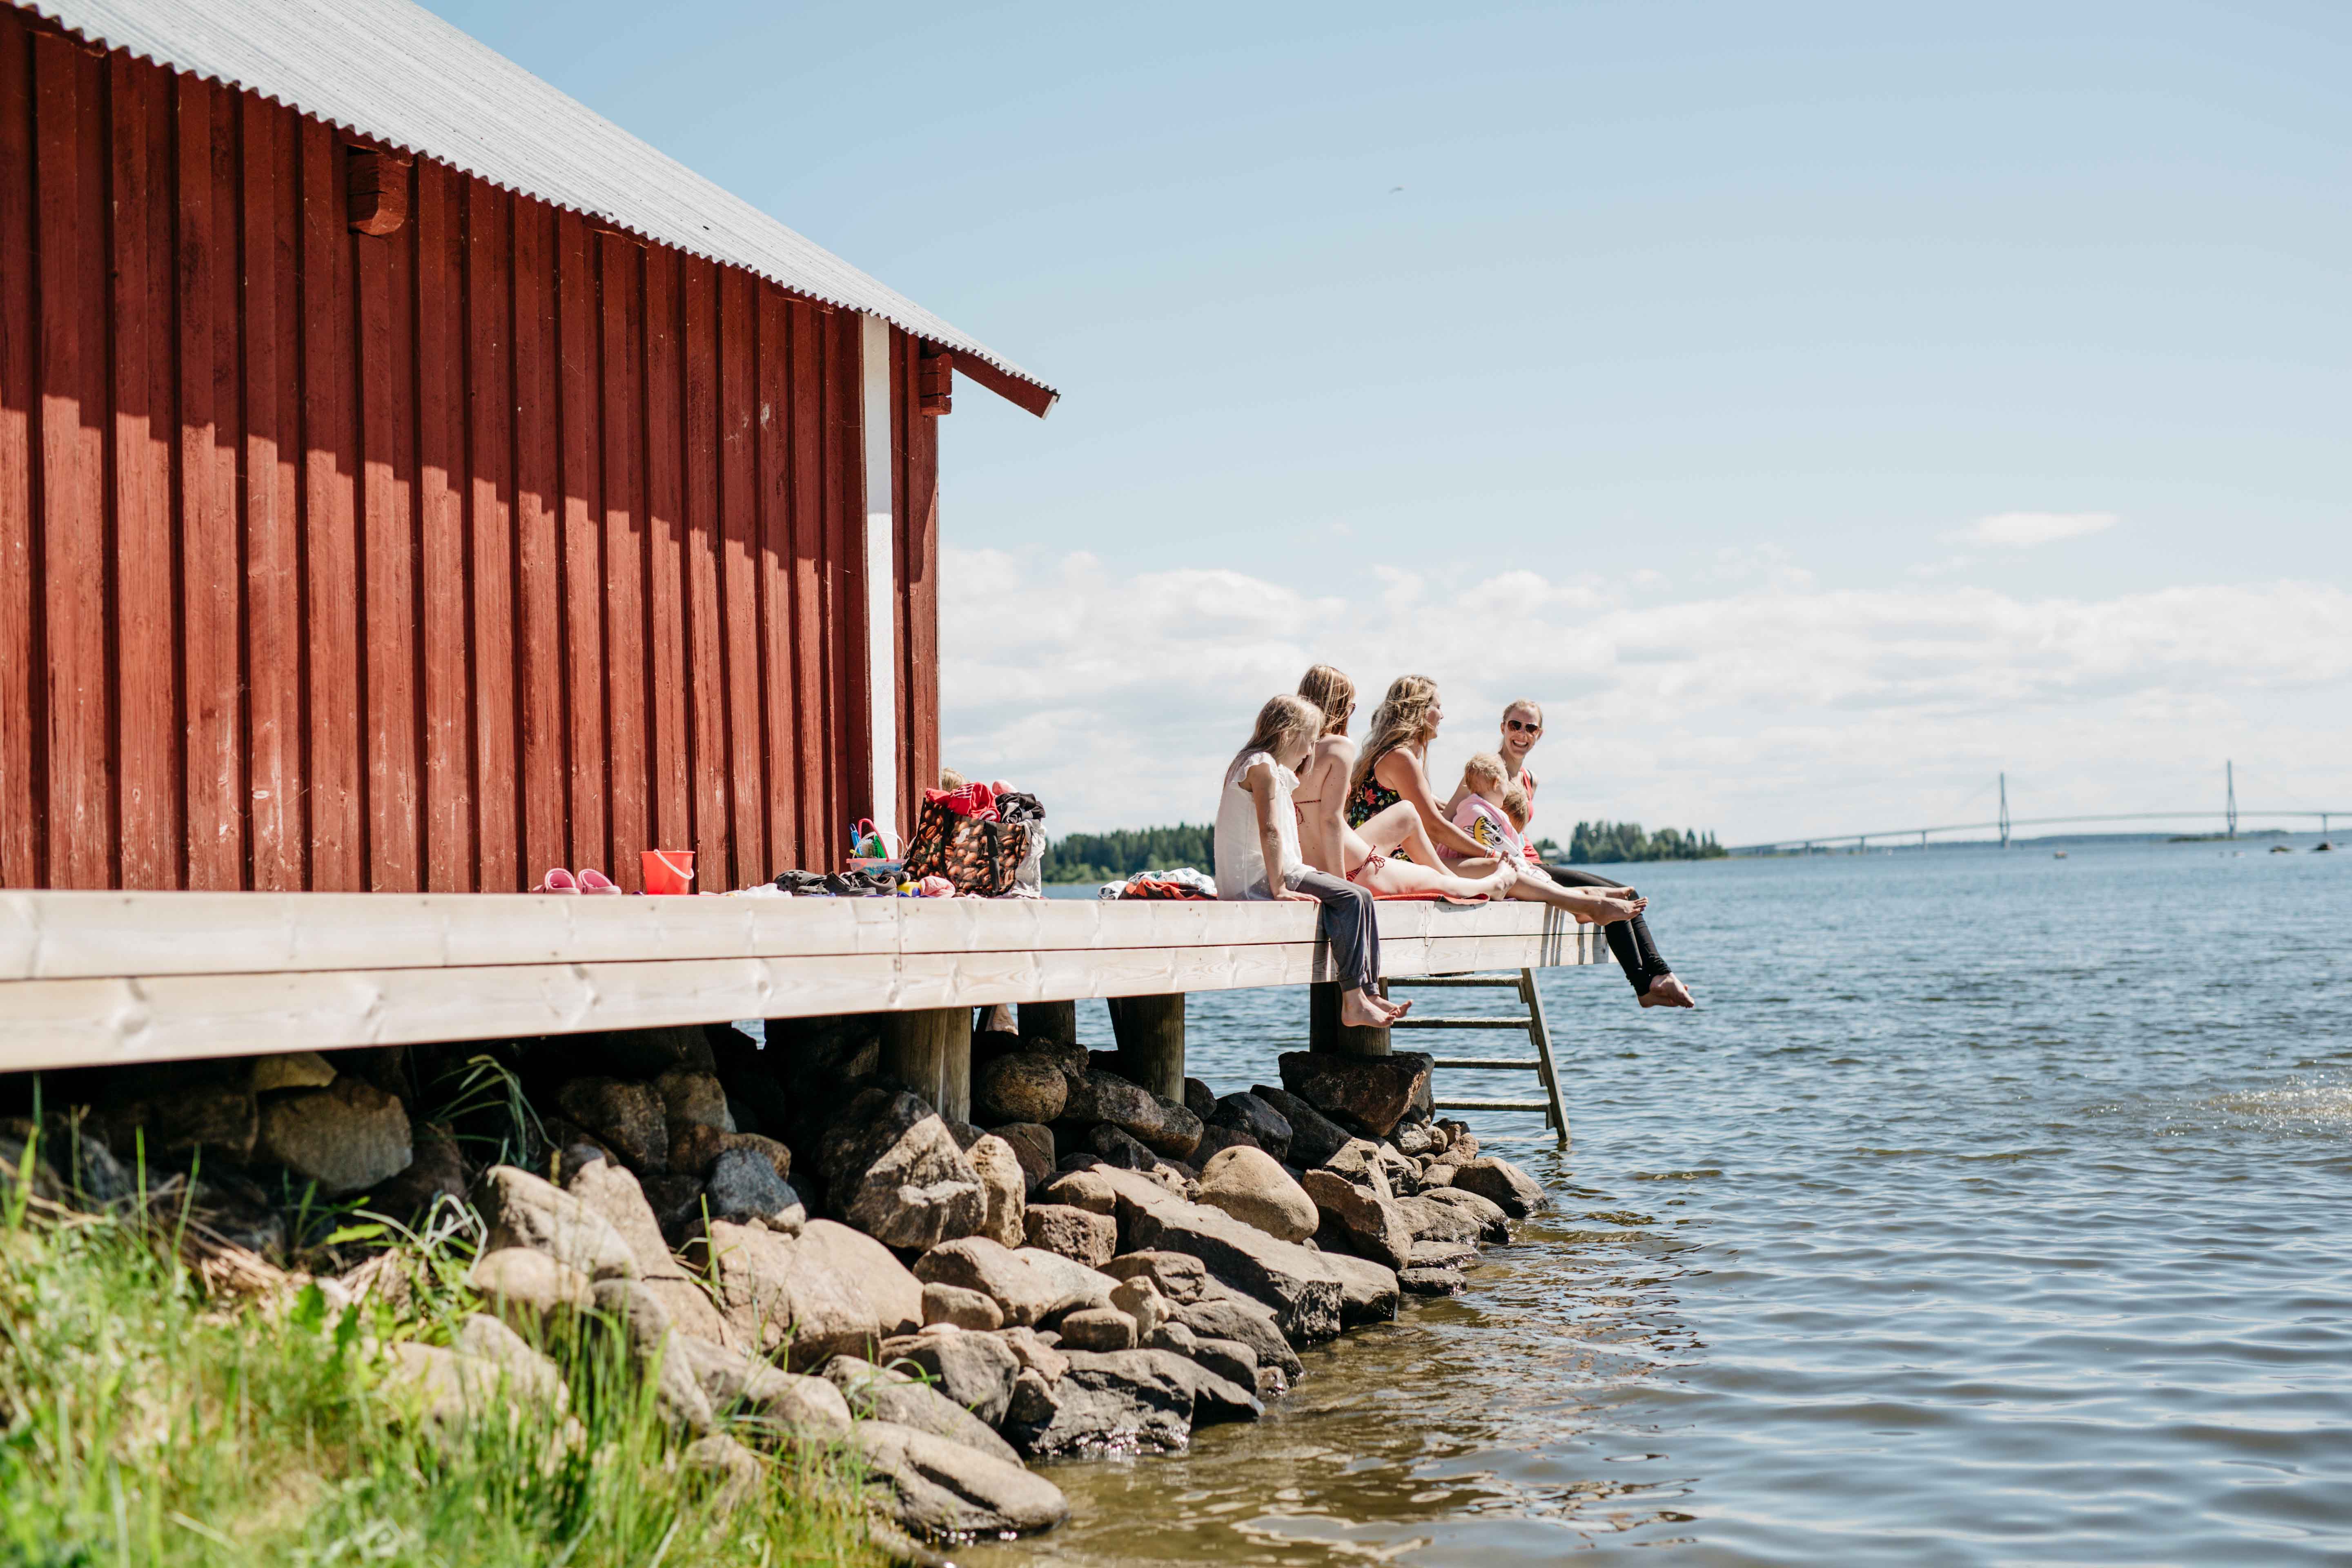 a family enjoying their time in a pier at the Finnish archipelago